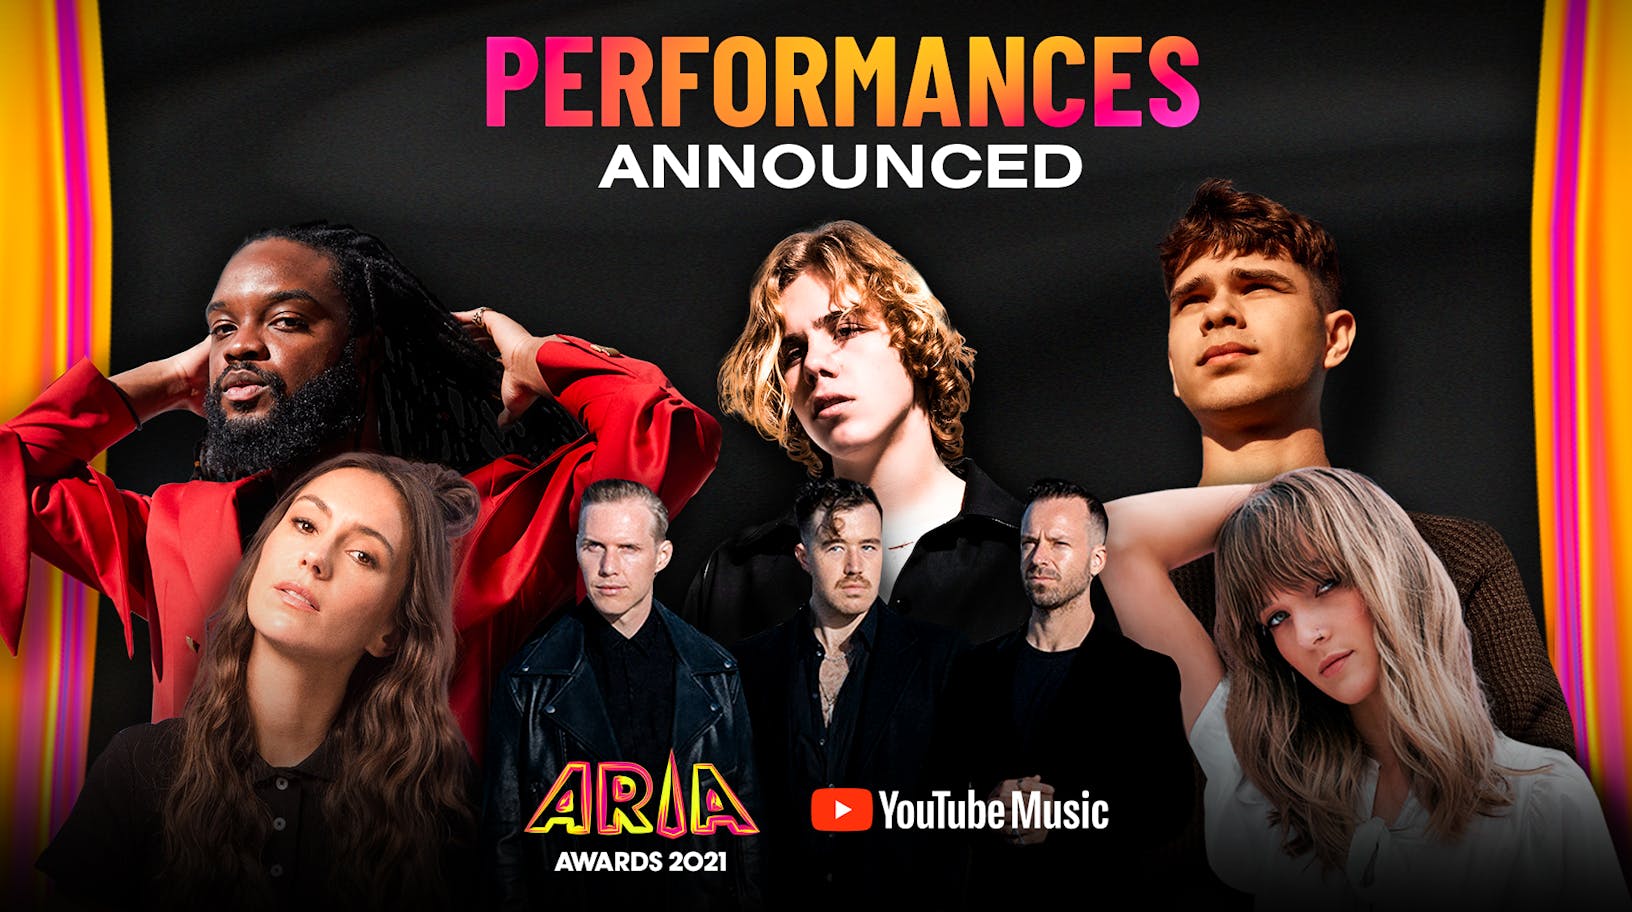 ARIA Reveals Wild Lineup For 2021 Awards In Partnership With YouTube